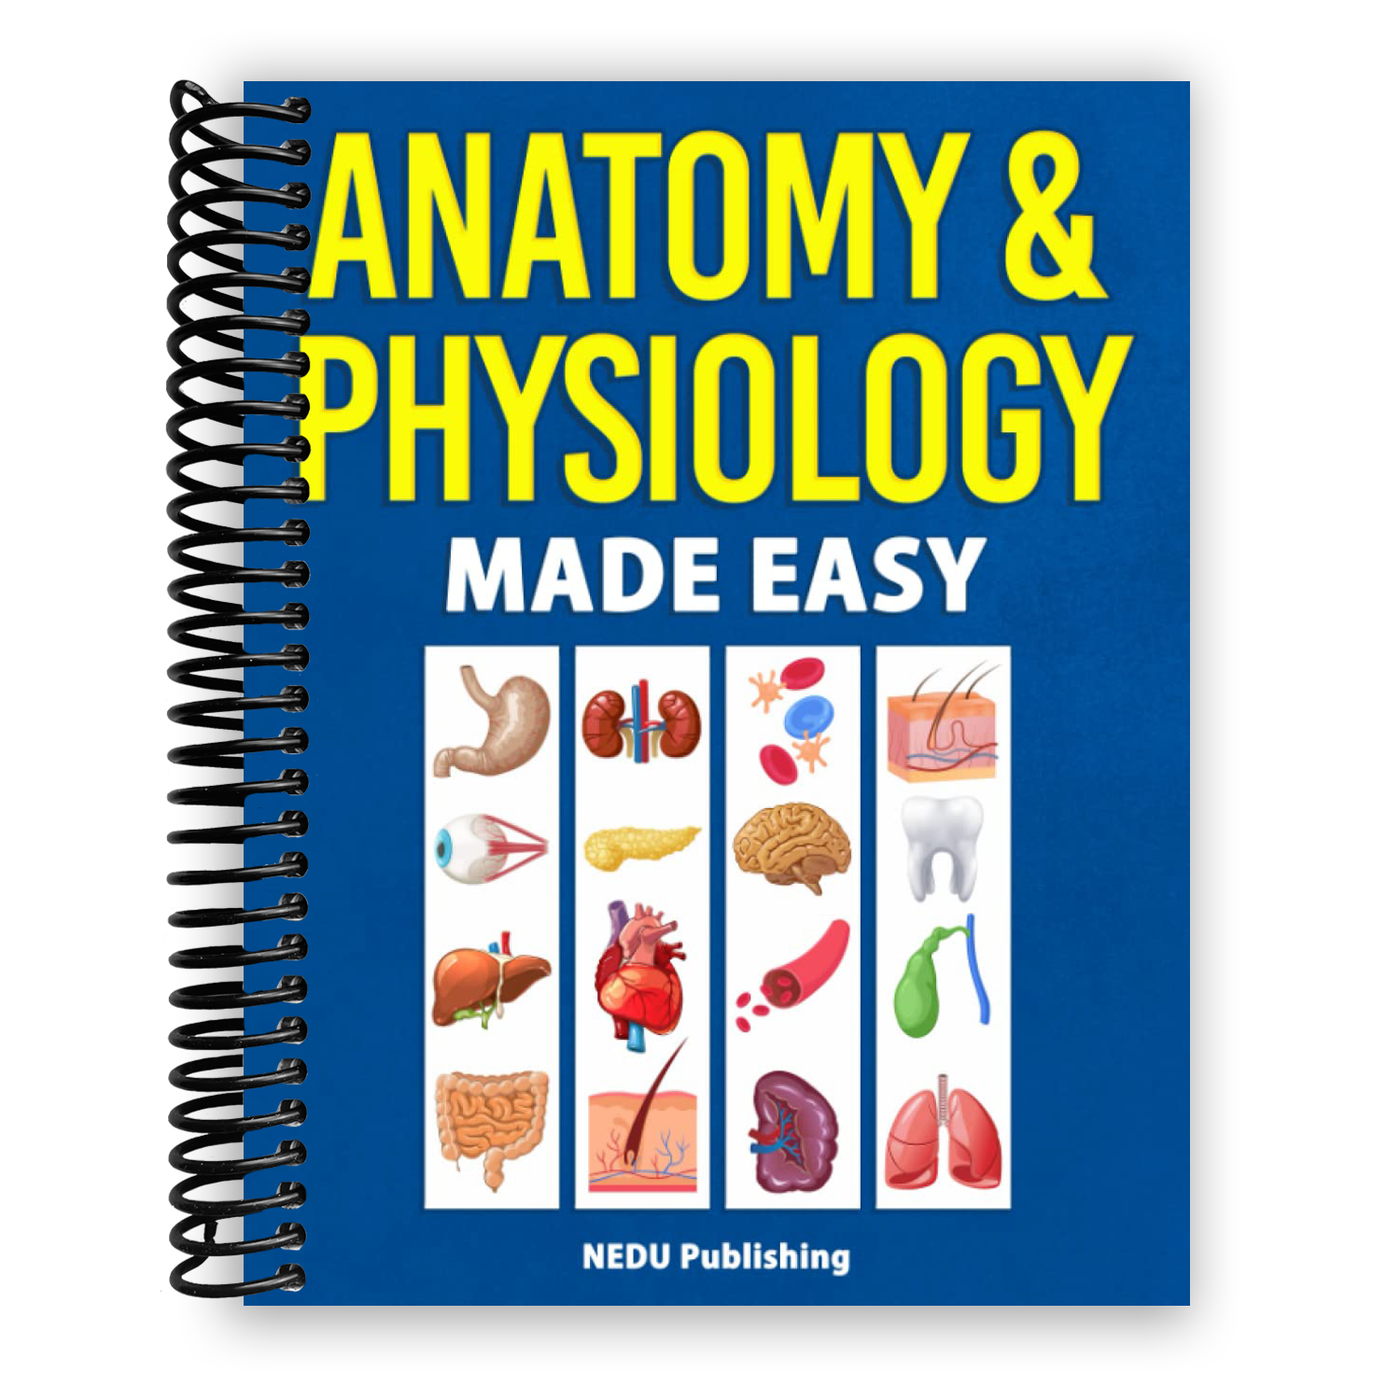 Anatomy & Physiology Made Easy: An Illustrated Study Guide for Students To Easily Learn Anatomy and Physiology (Spiral Bound)